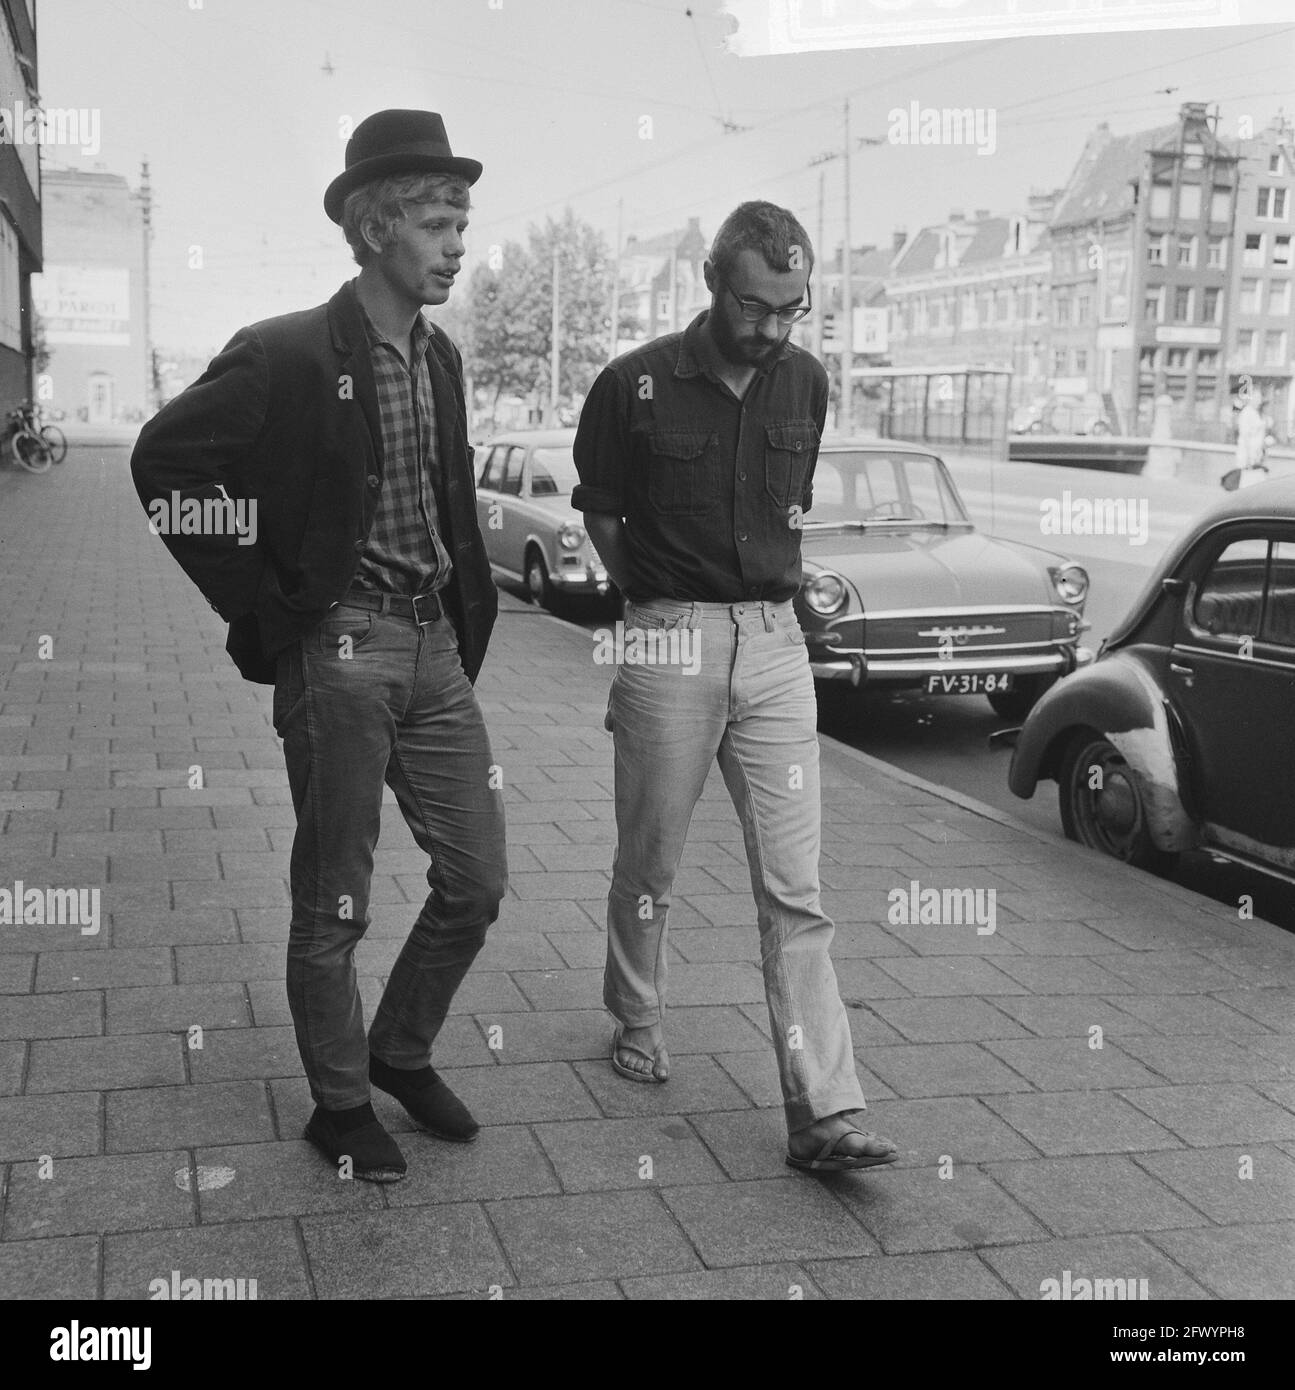 Rob Stolk (left, with bowler hat) and Roel van Duyn, August 14, 1965, activists, police, The Netherlands, 20th century press agency photo, news to remember, documentary, historic photography 1945-1990, visual stories, human history of the Twentieth Century, capturing moments in time Stock Photo